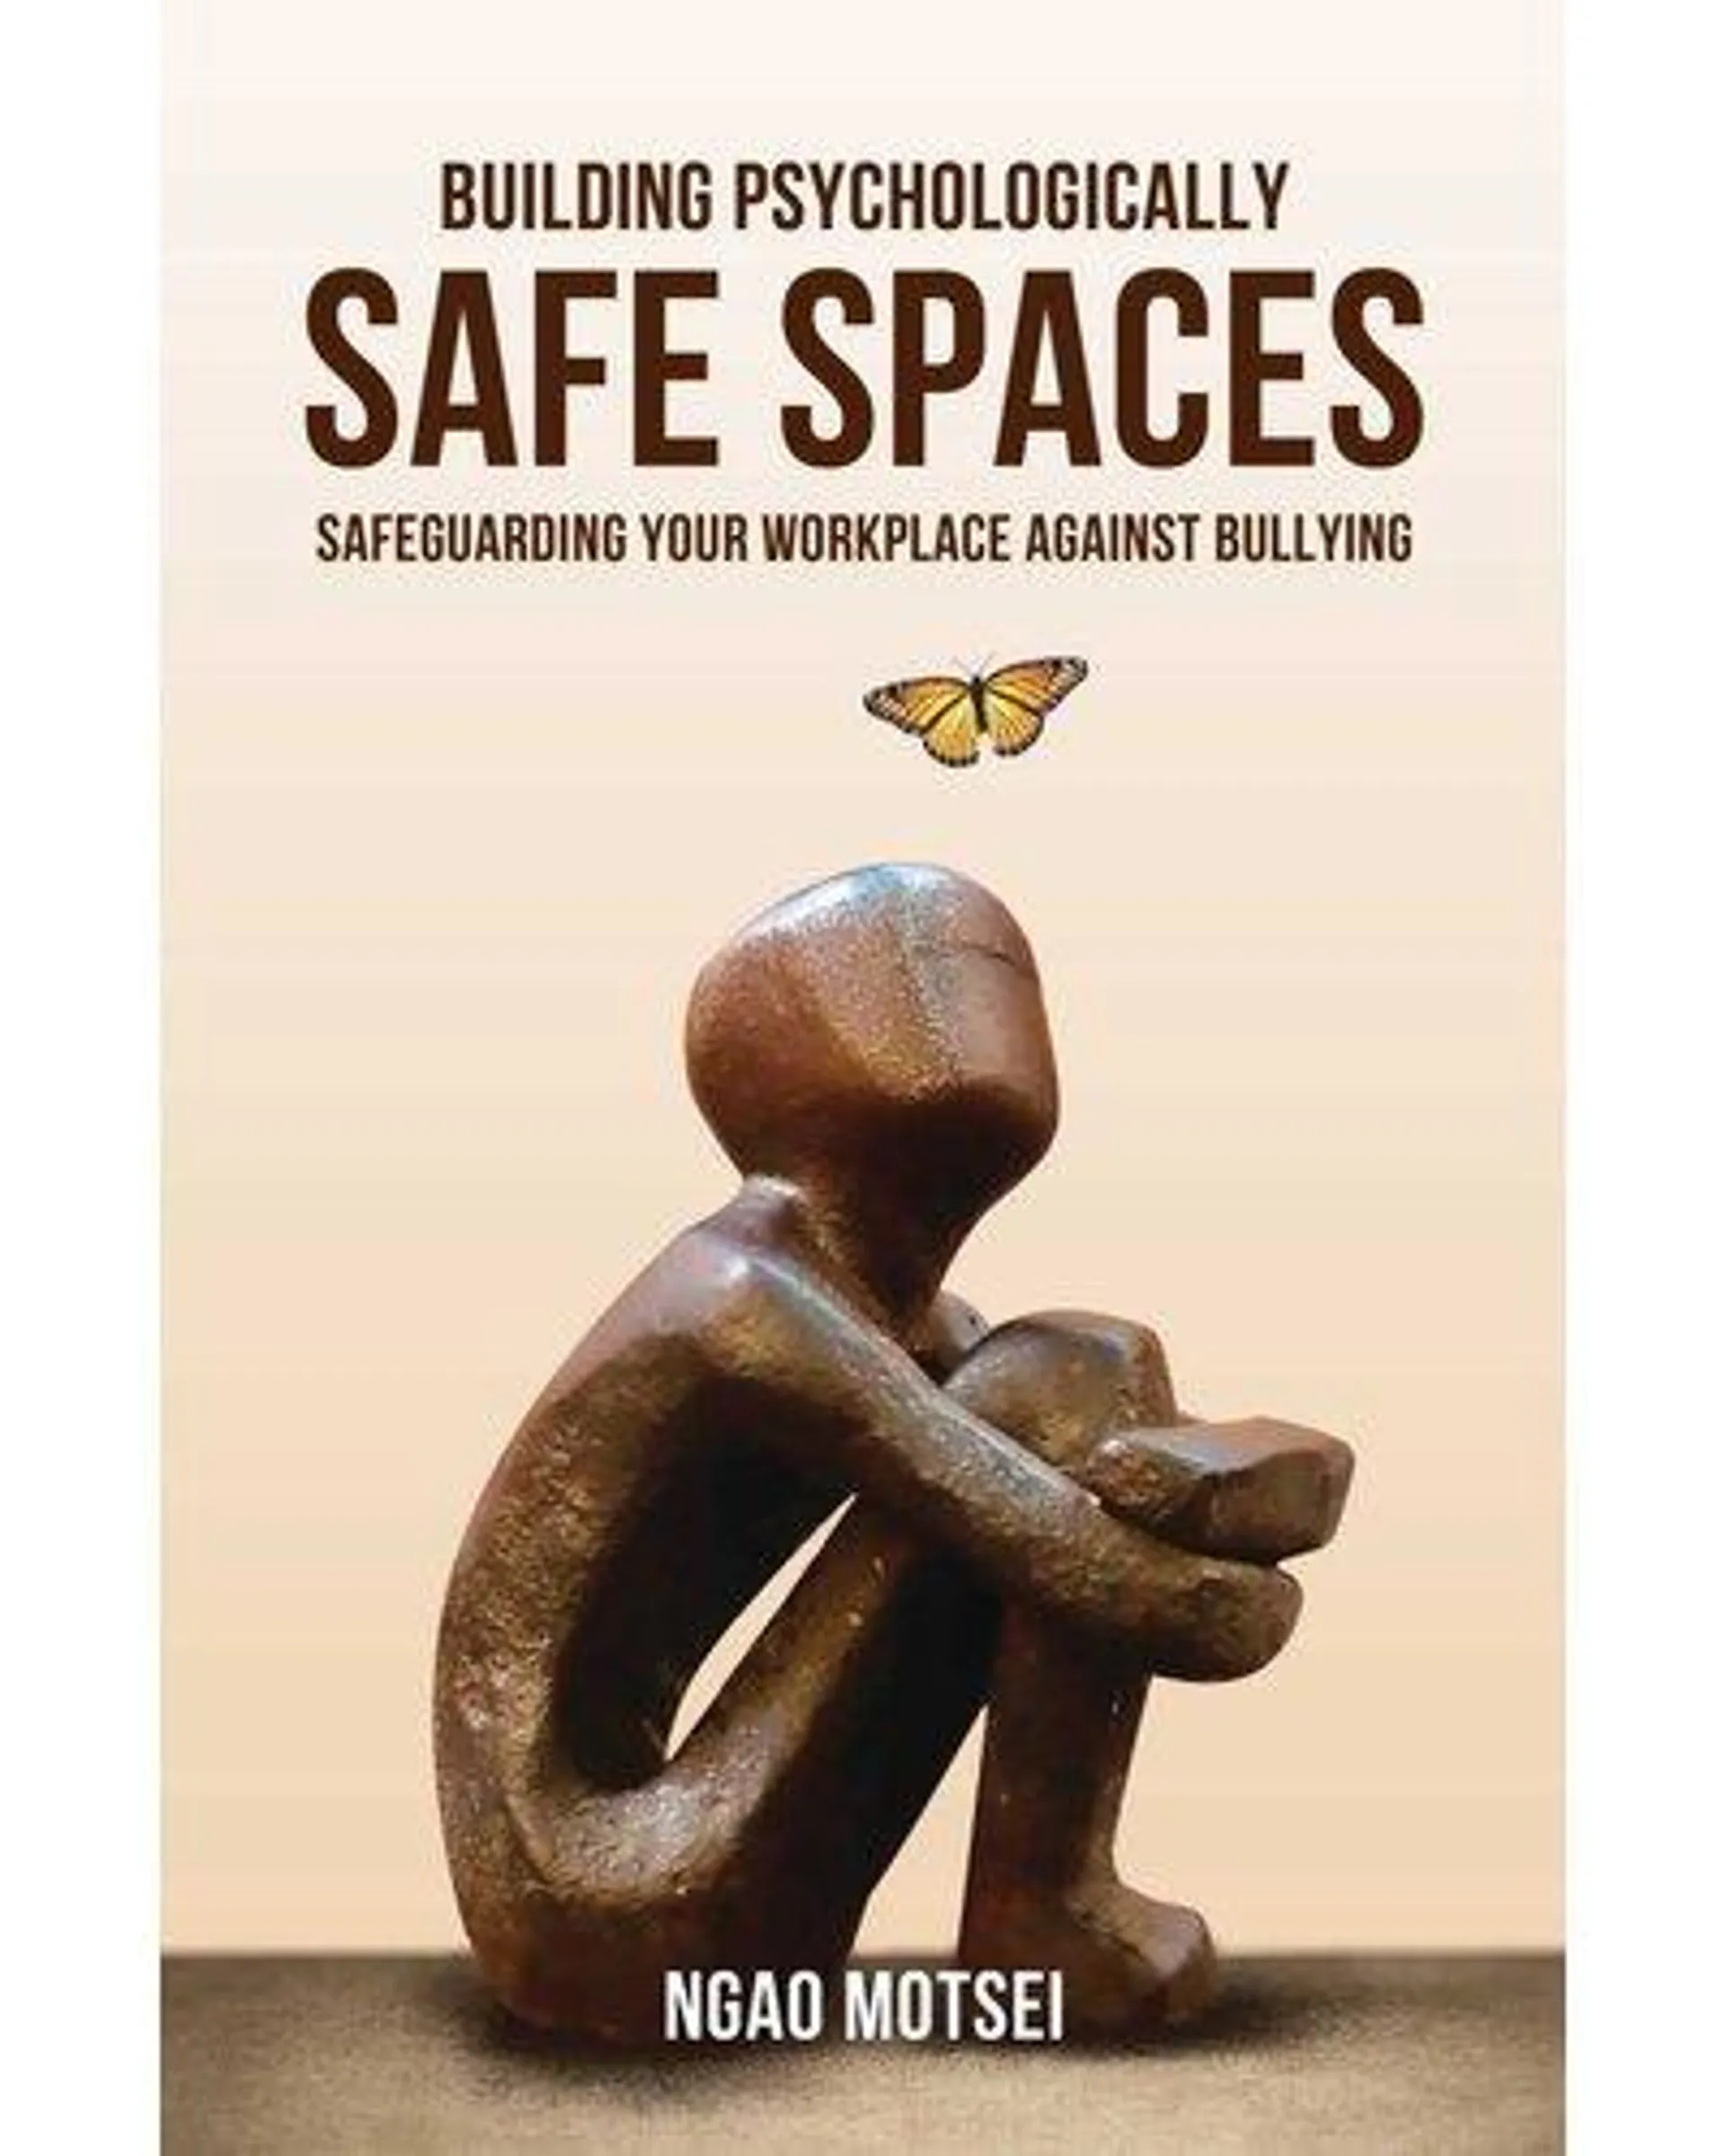 Building Psychologically Safe Spaces - Safeguarding Your Workplace Against Bullying (Paperback)